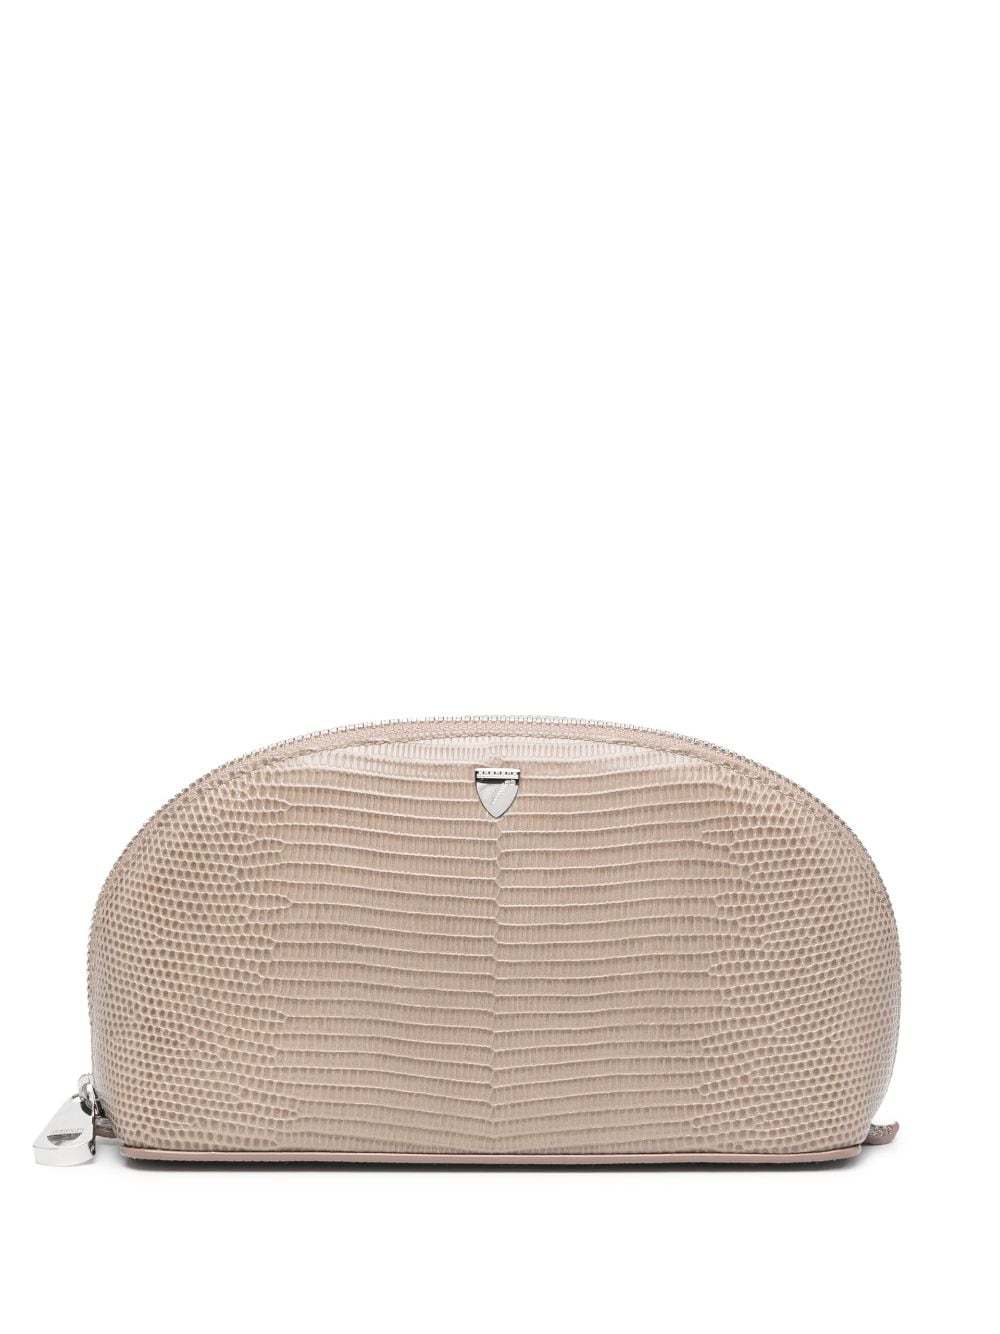 Aspinal Of London Madison leather makeup bag - Neutrals von Aspinal Of London